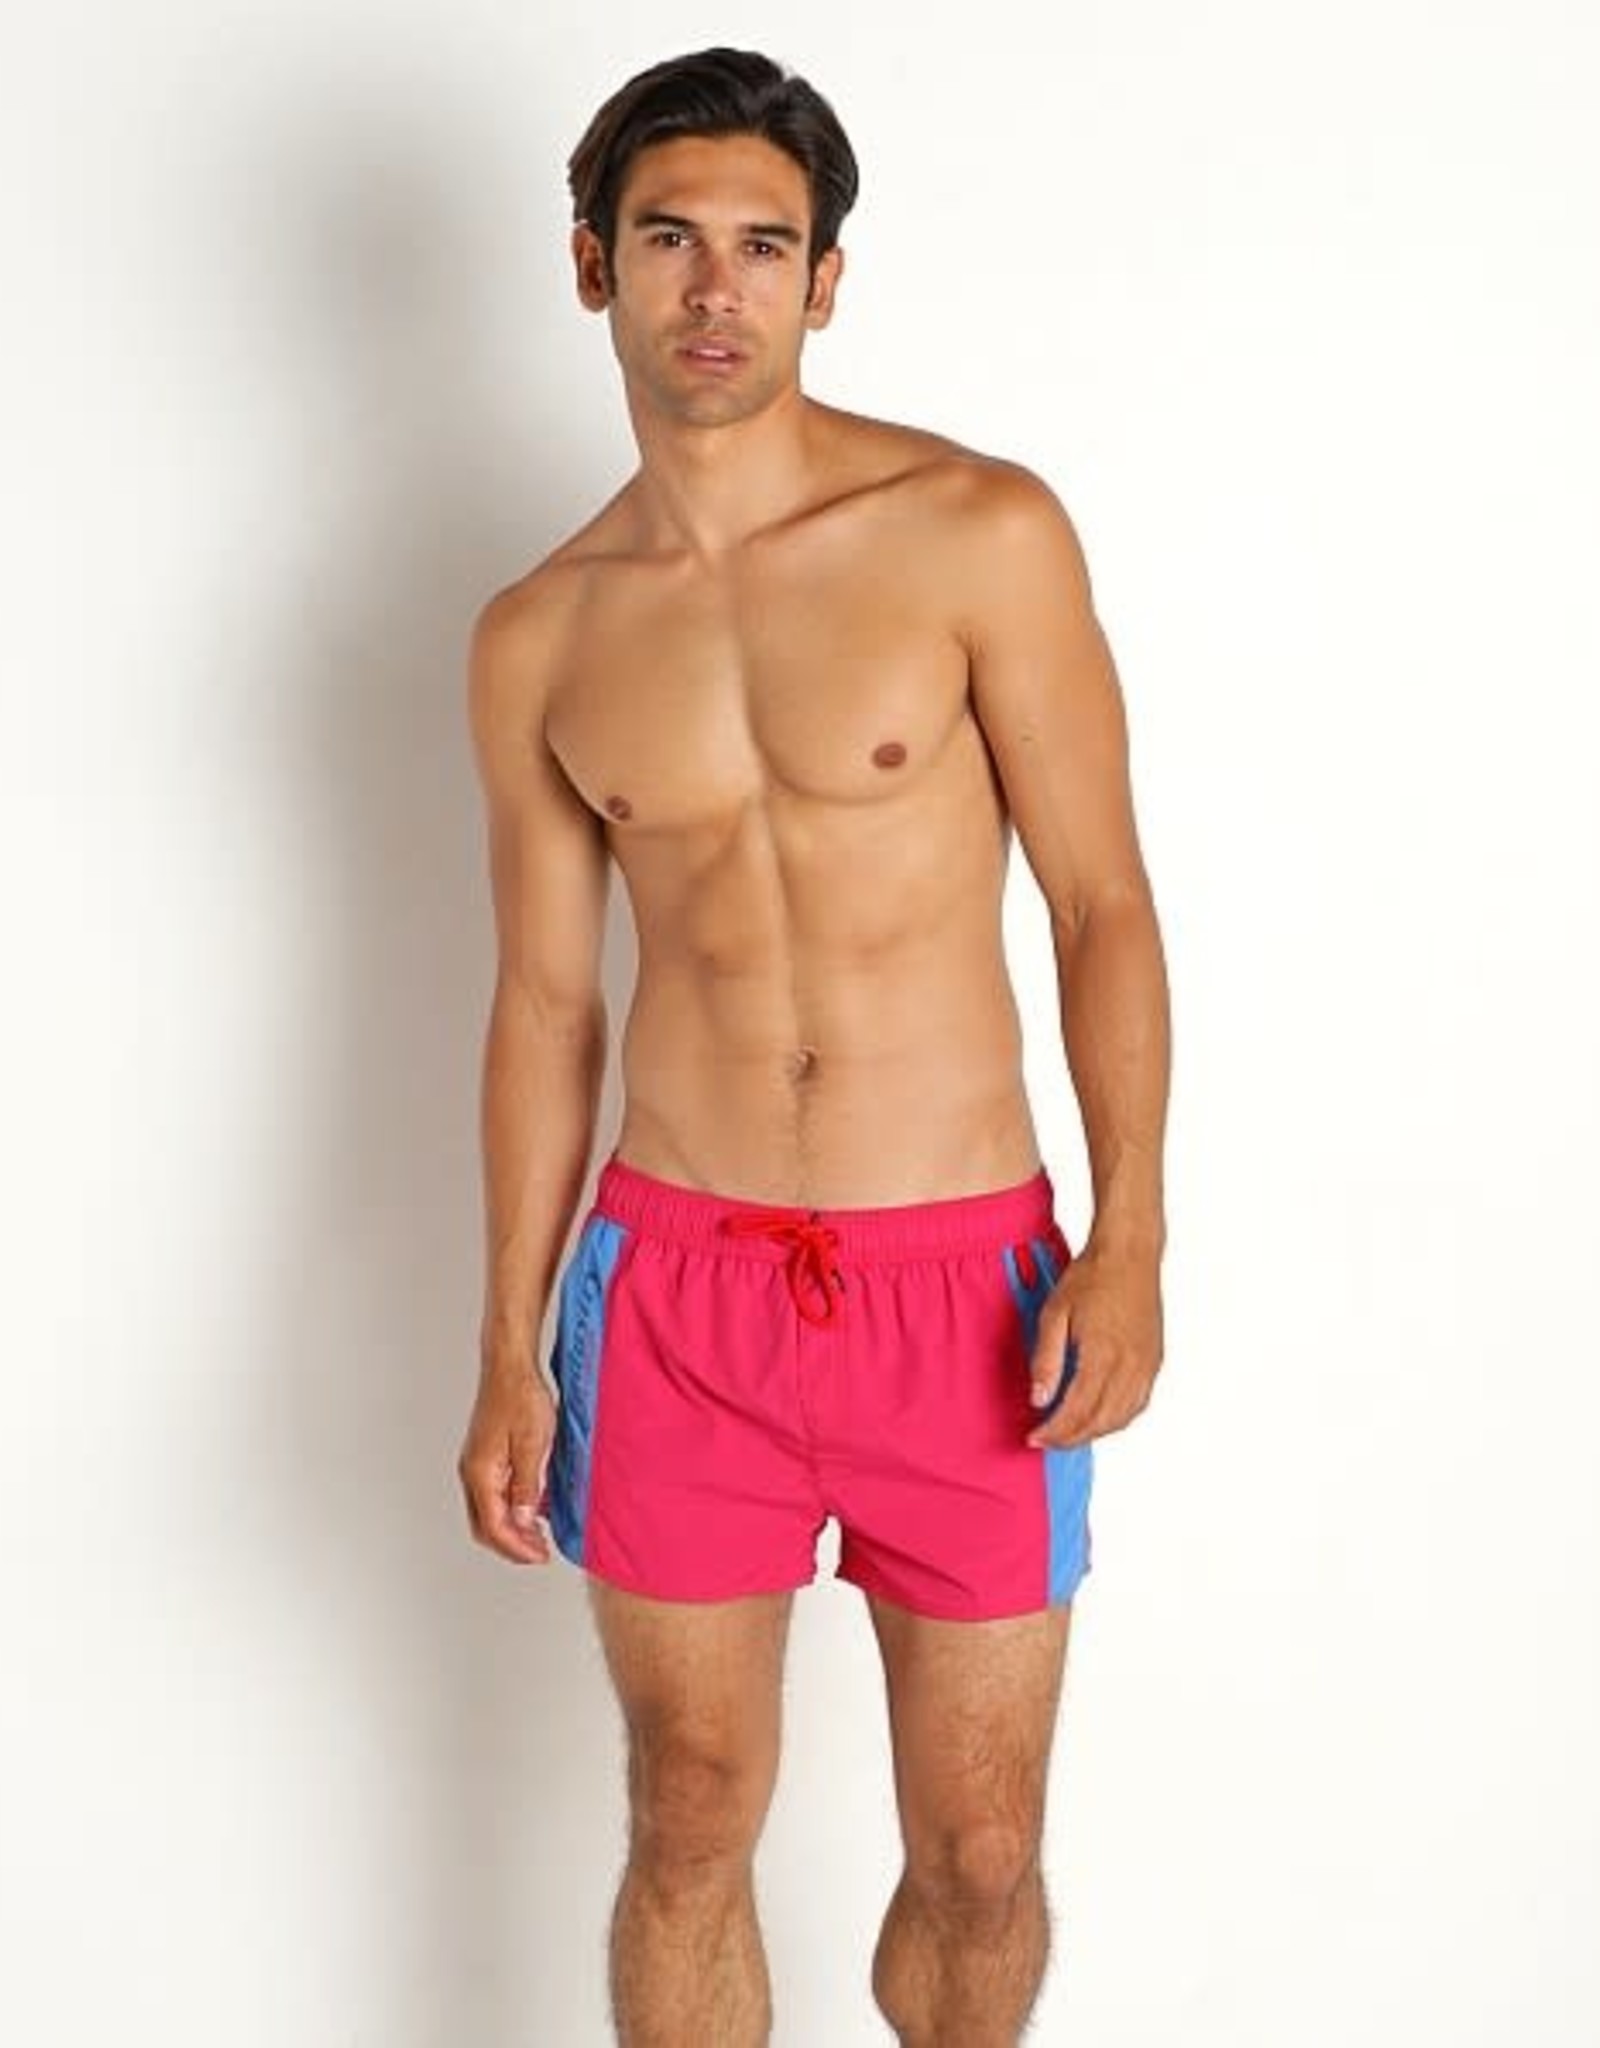 Diesel BMBX-CayBay Calzoncini Short (2 colors)